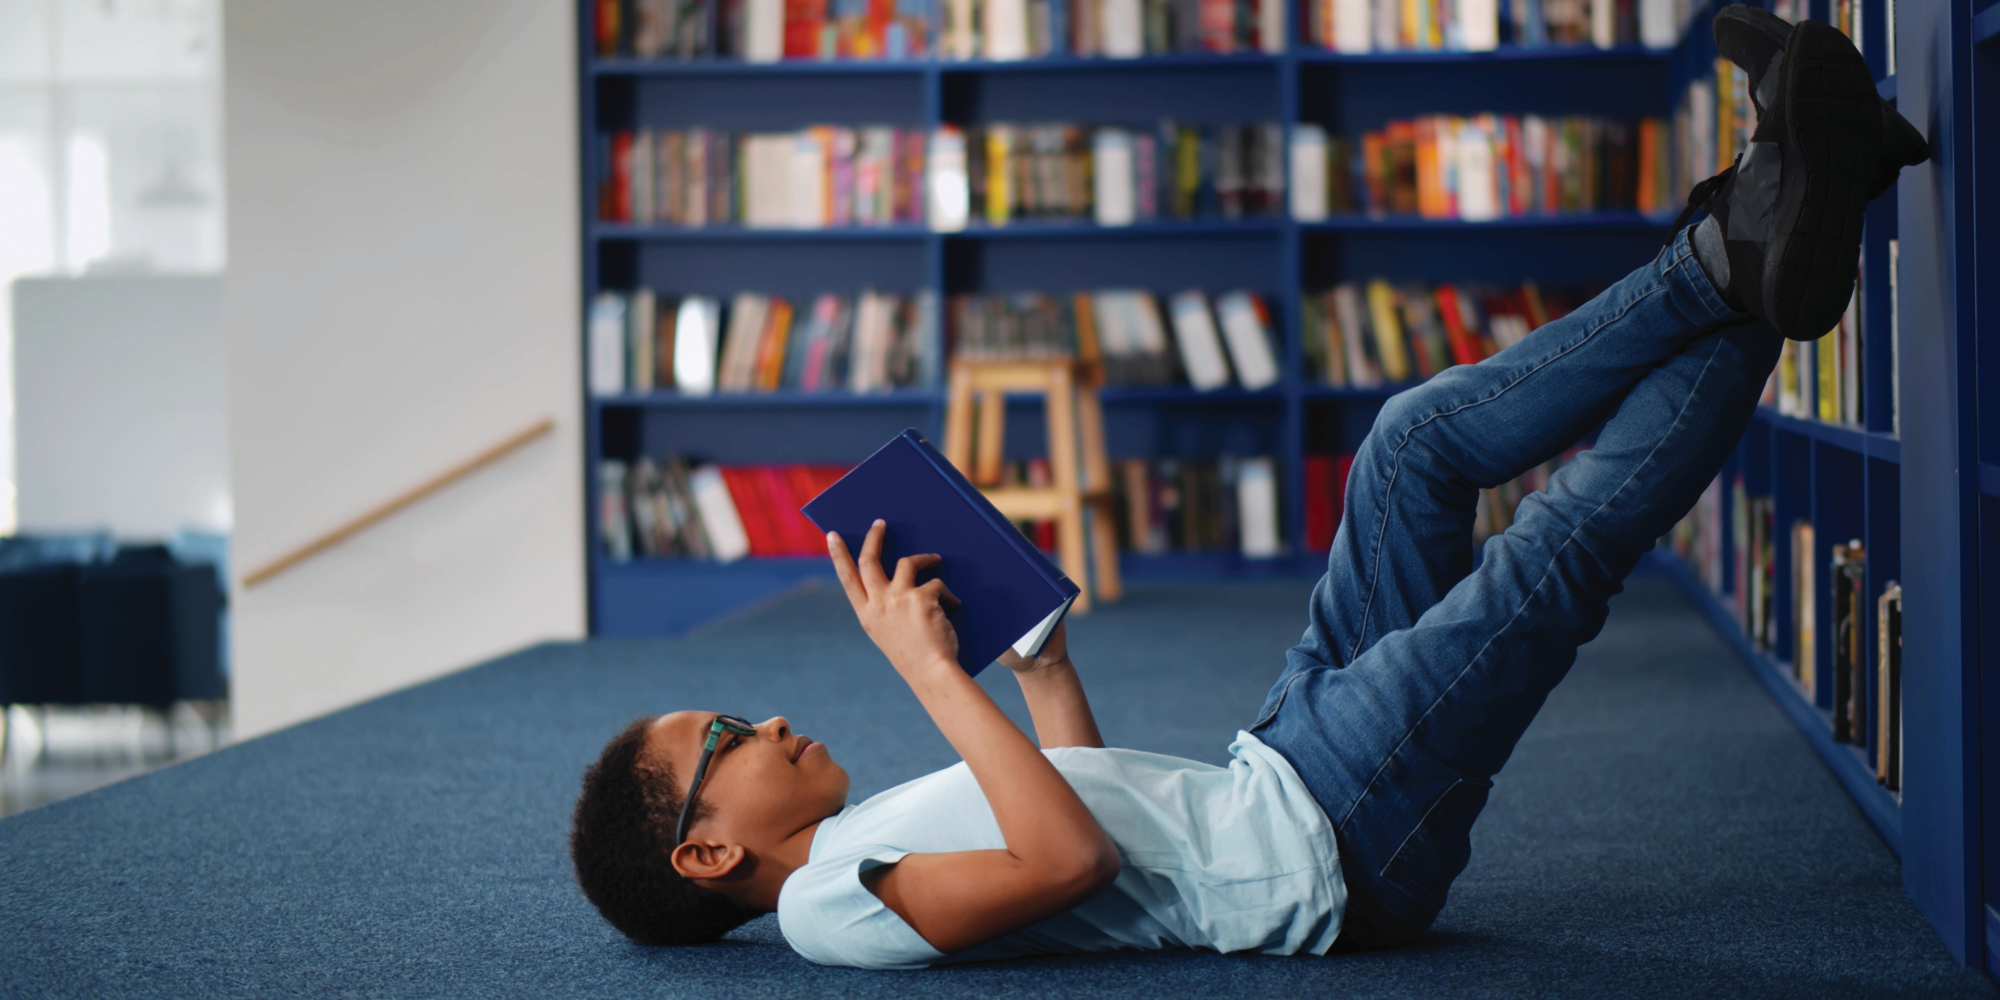 A young child reading a book while lying on the floor.